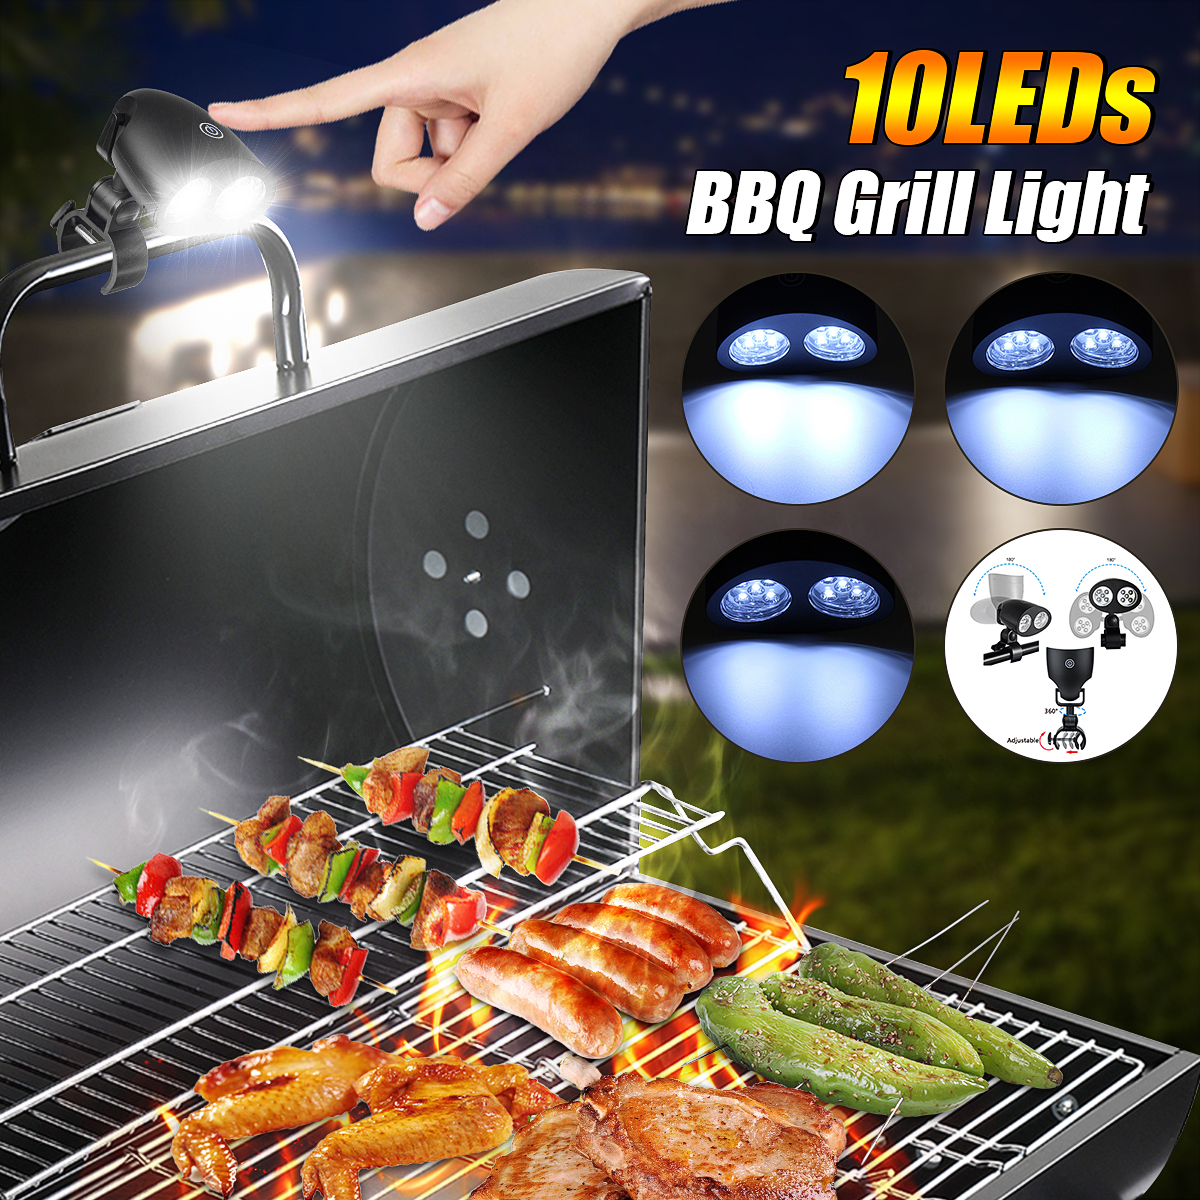 BBQ-Grill-Light-Camping-Picnic-Durable-Super-Bright-10-Led-Battery-Powered-Barbecue-Lamp-1613019-1